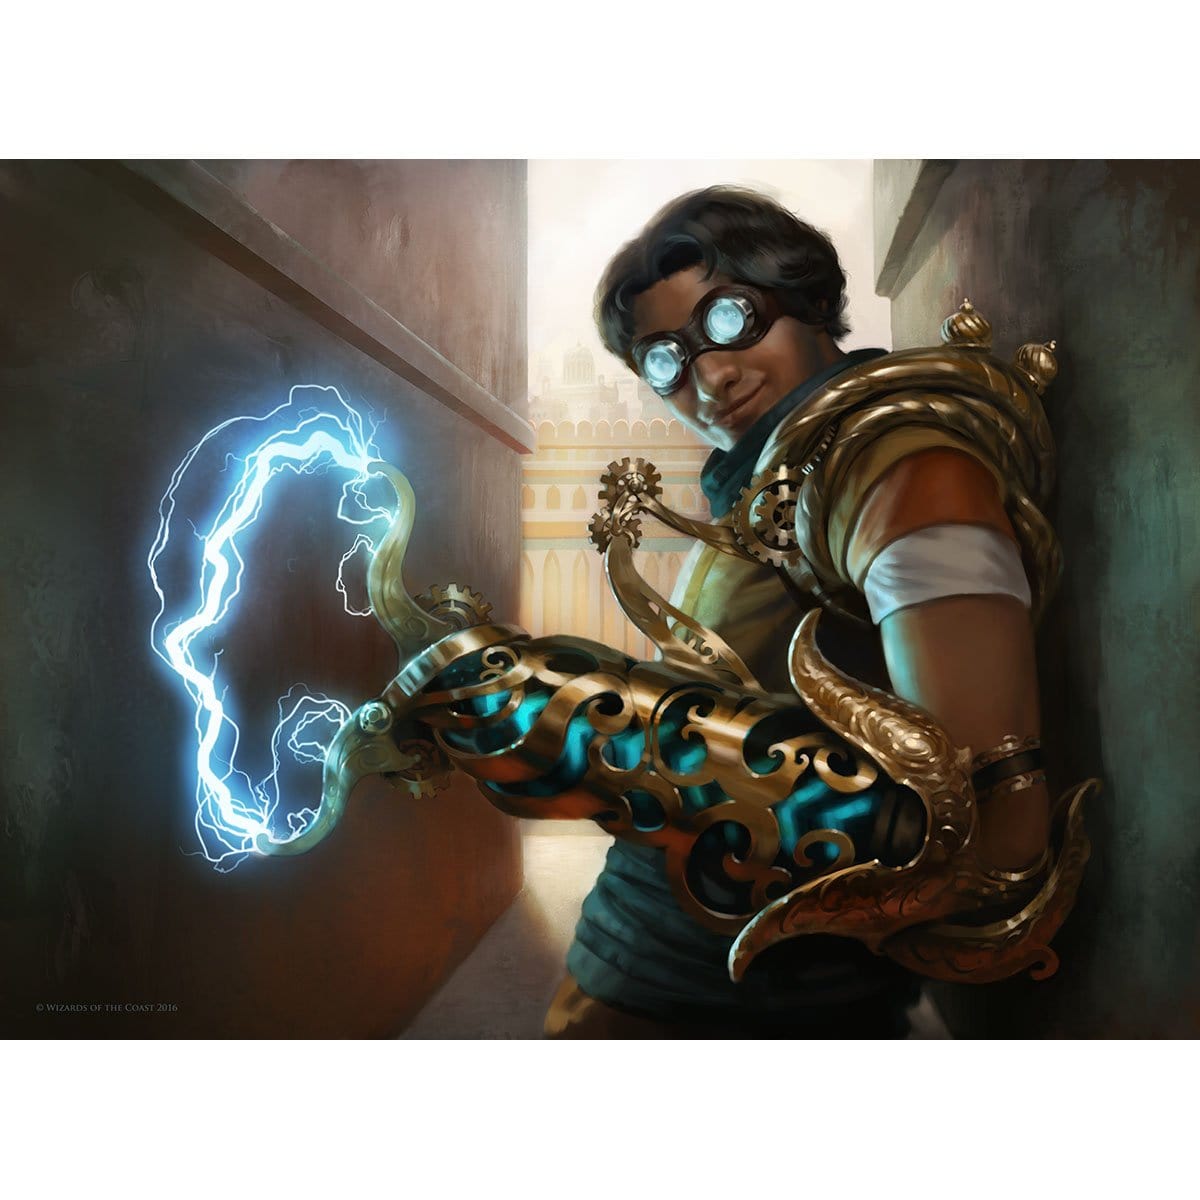 Shock Print - Print - Original Magic Art - Accessories for Magic the Gathering and other card games